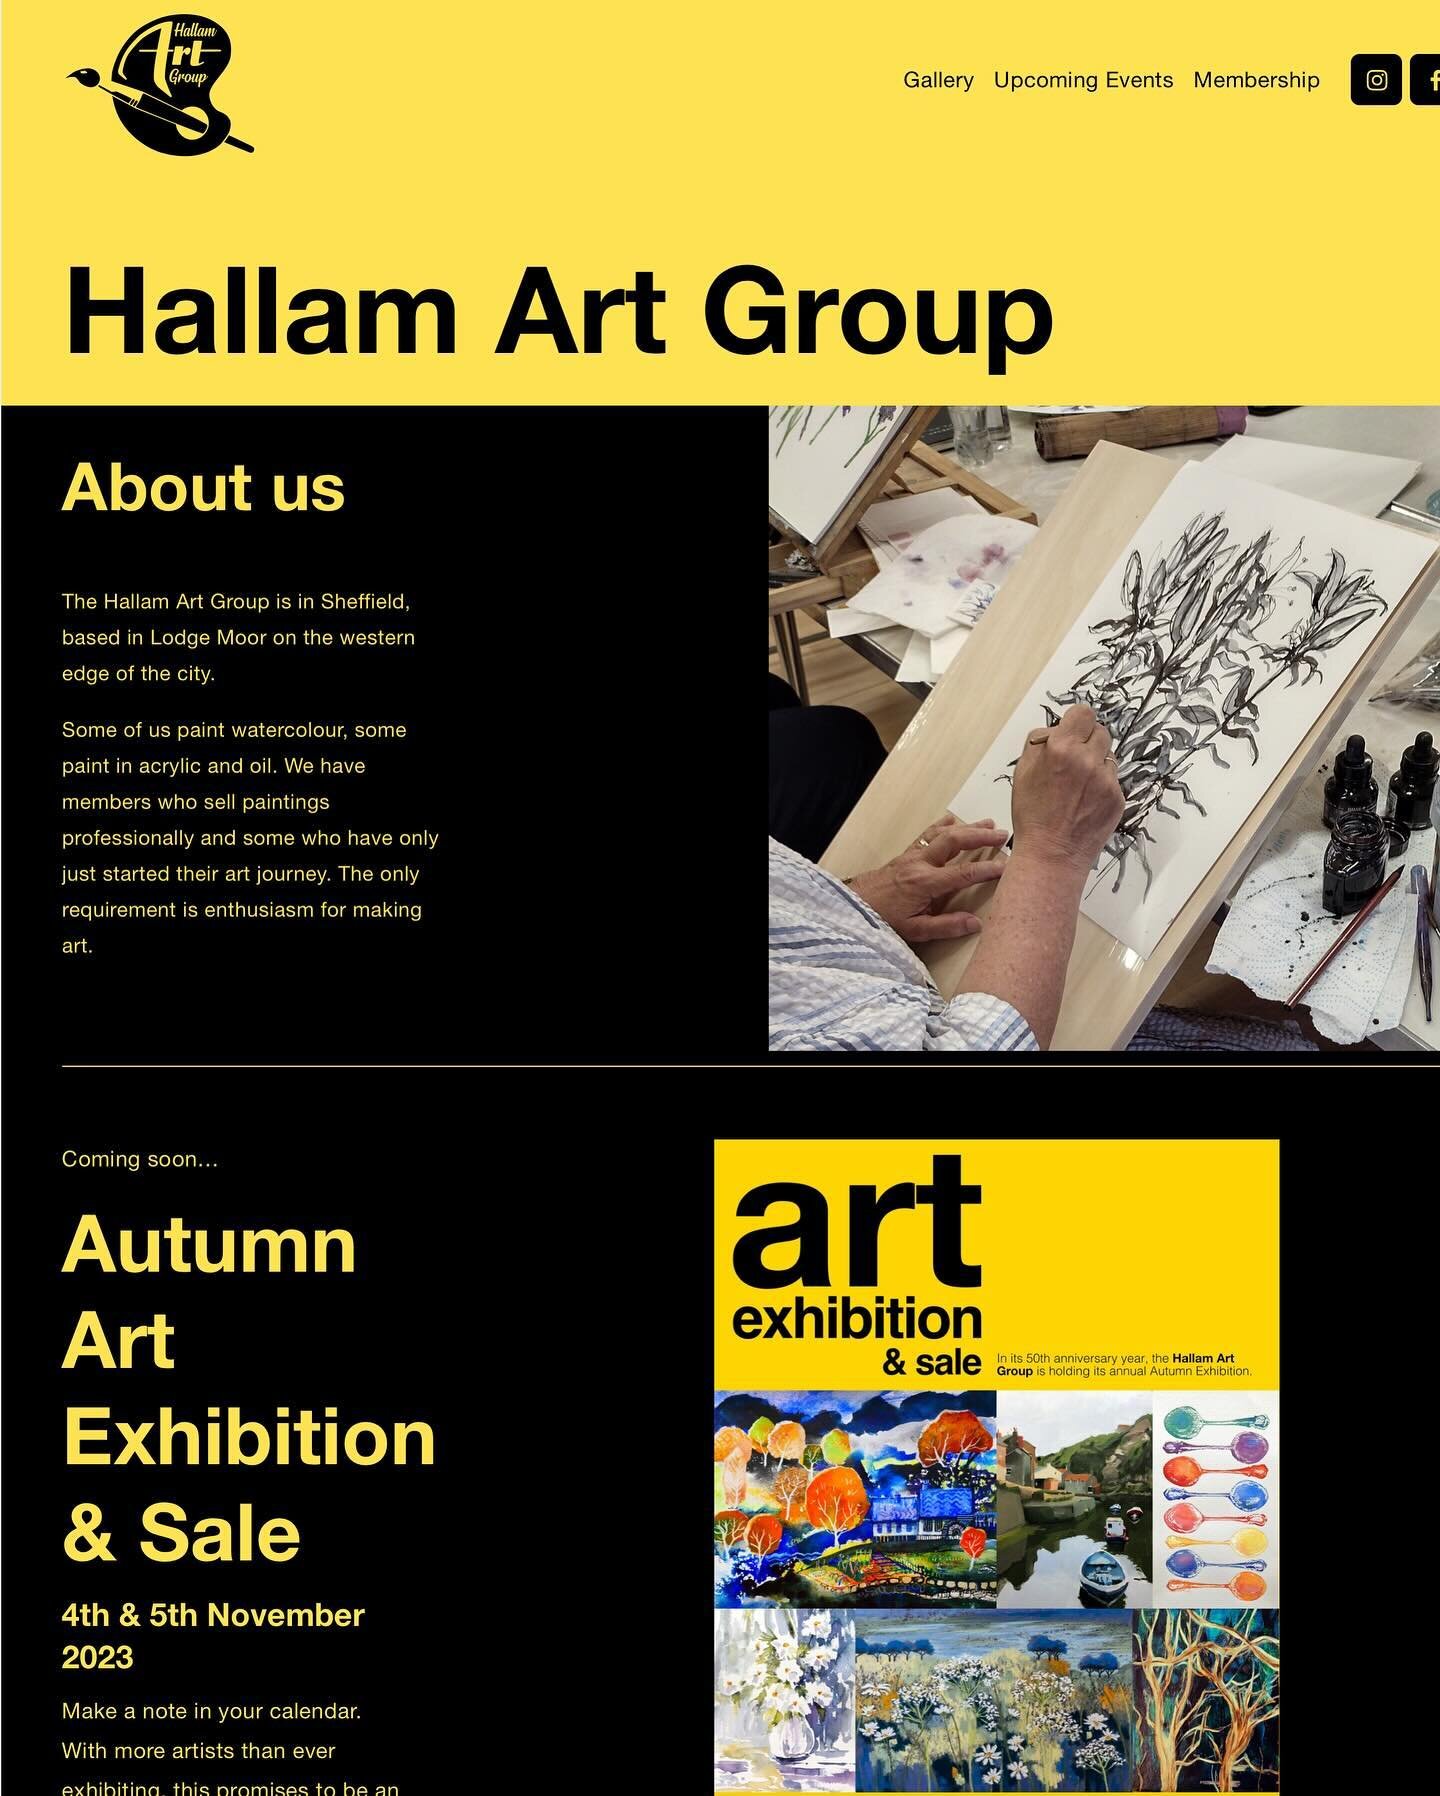 Hallam Art Group has a shiny new website.  Check it out for news, membership info, upcoming events and a huge gallery of our member&rsquo;s artwork. 
hallamartgroup.co.uk
#hallamartgroup #sheffieldartists